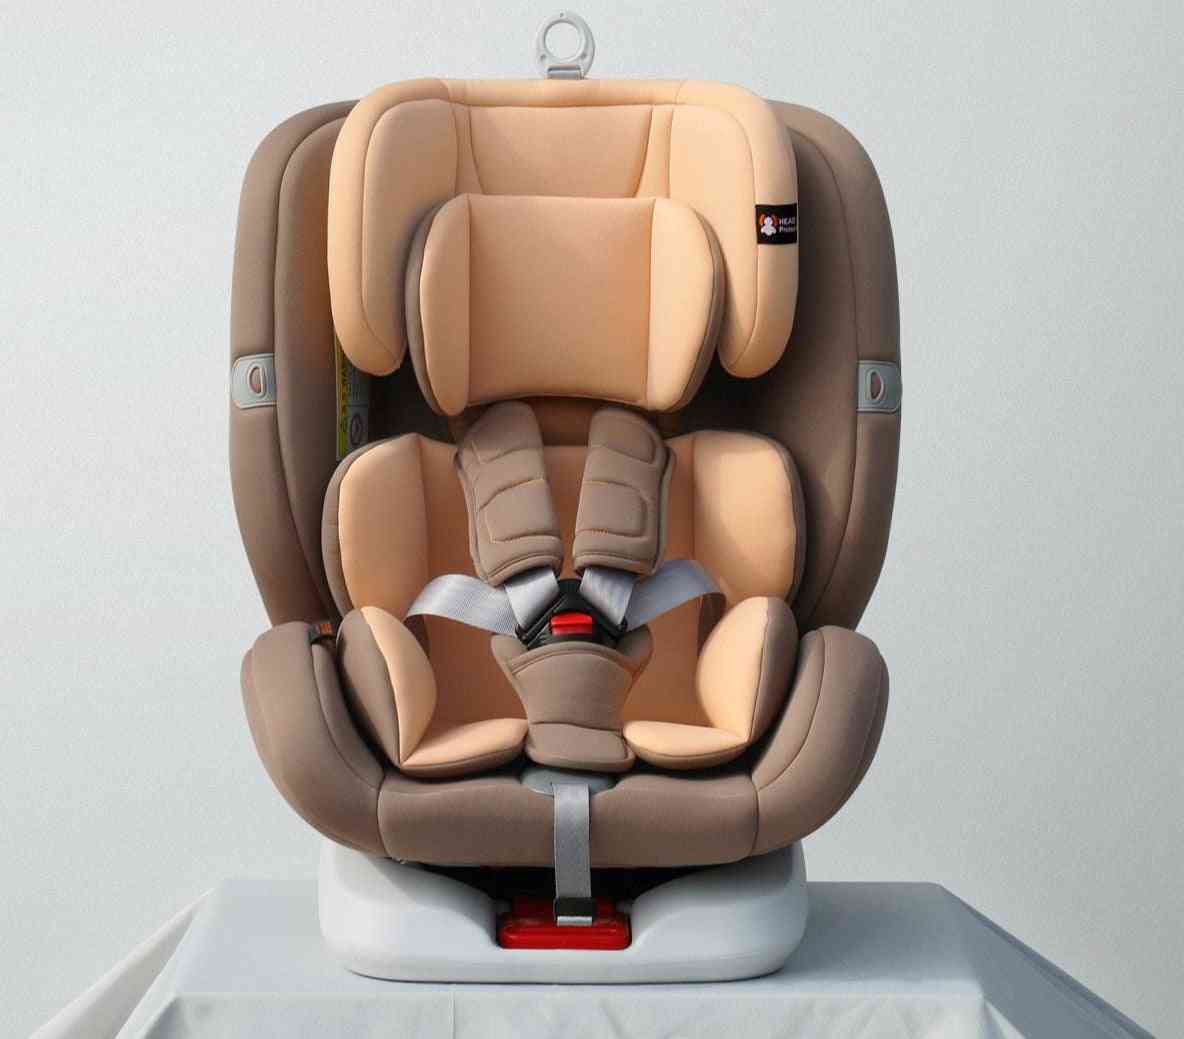 Child Safety Car Seat For 0-12 Years Old